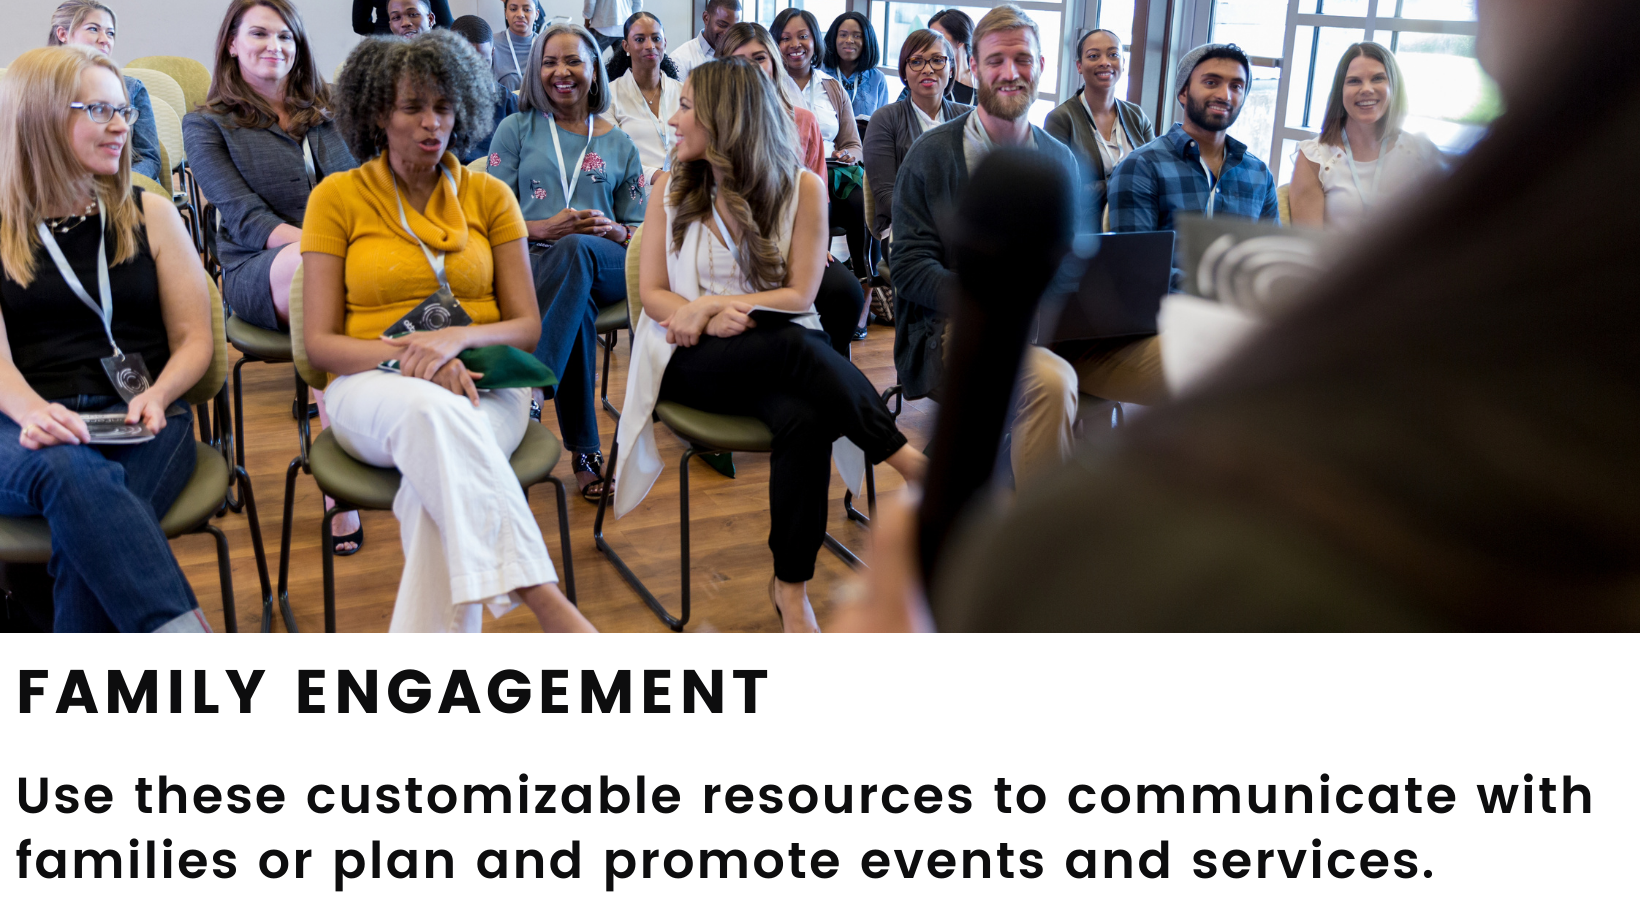 Image: Photo of a parent-teacher conference. Header: Family Engagement. Body: Use these customizable resources to communicate with families or plan and promote events and services.